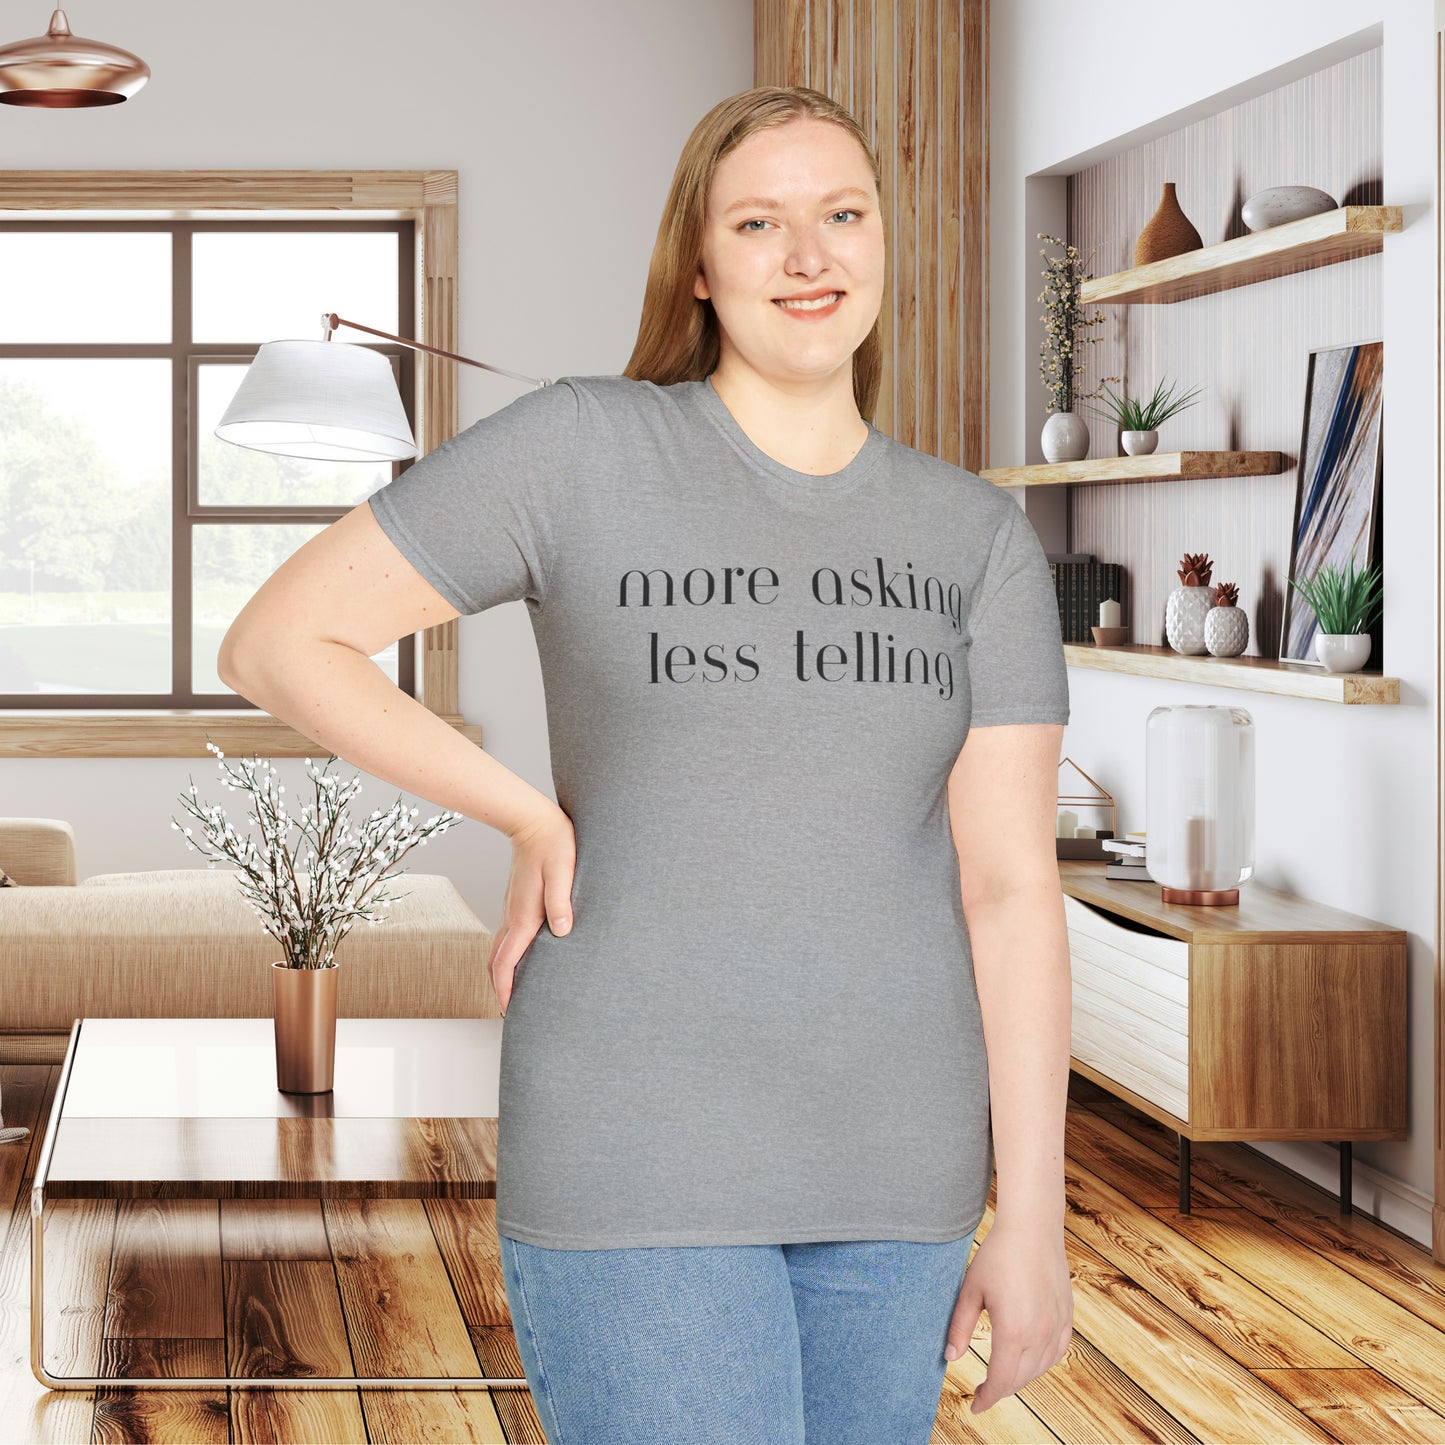 We can learn so much from others when we take the time to do ”more asking less telling”. A great reminder on this Unisex Softstyle T-Shirt.